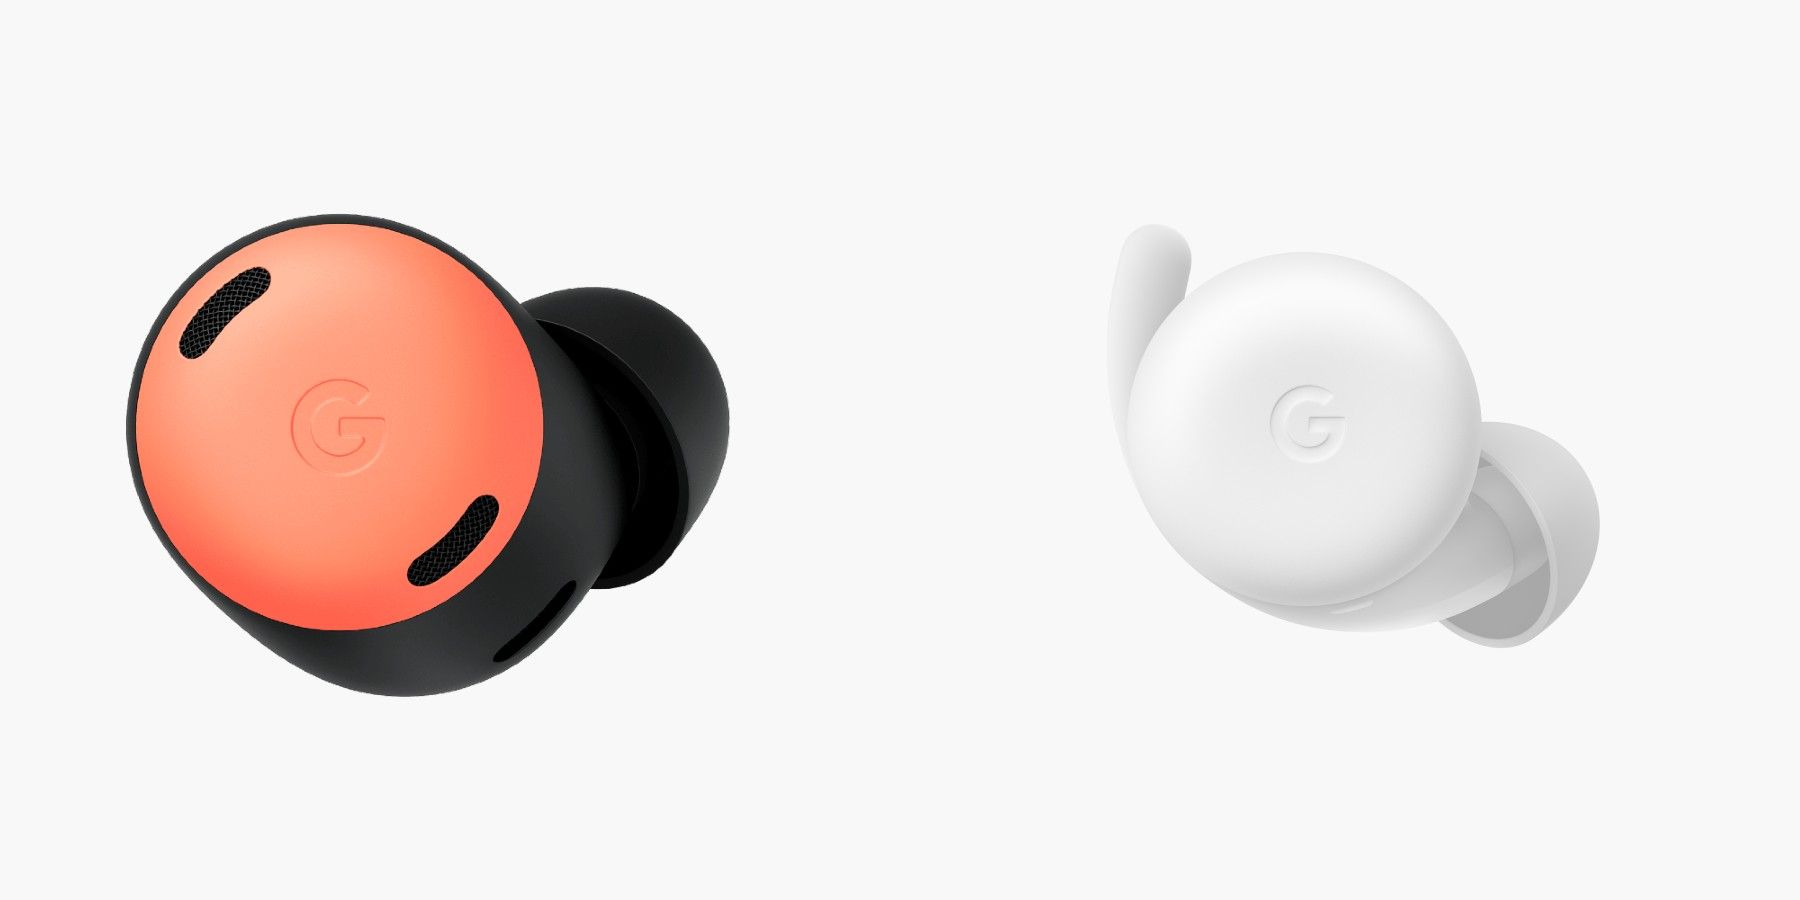 The Pixel Buds Pro are heavier than the Pixel Buds A-Series